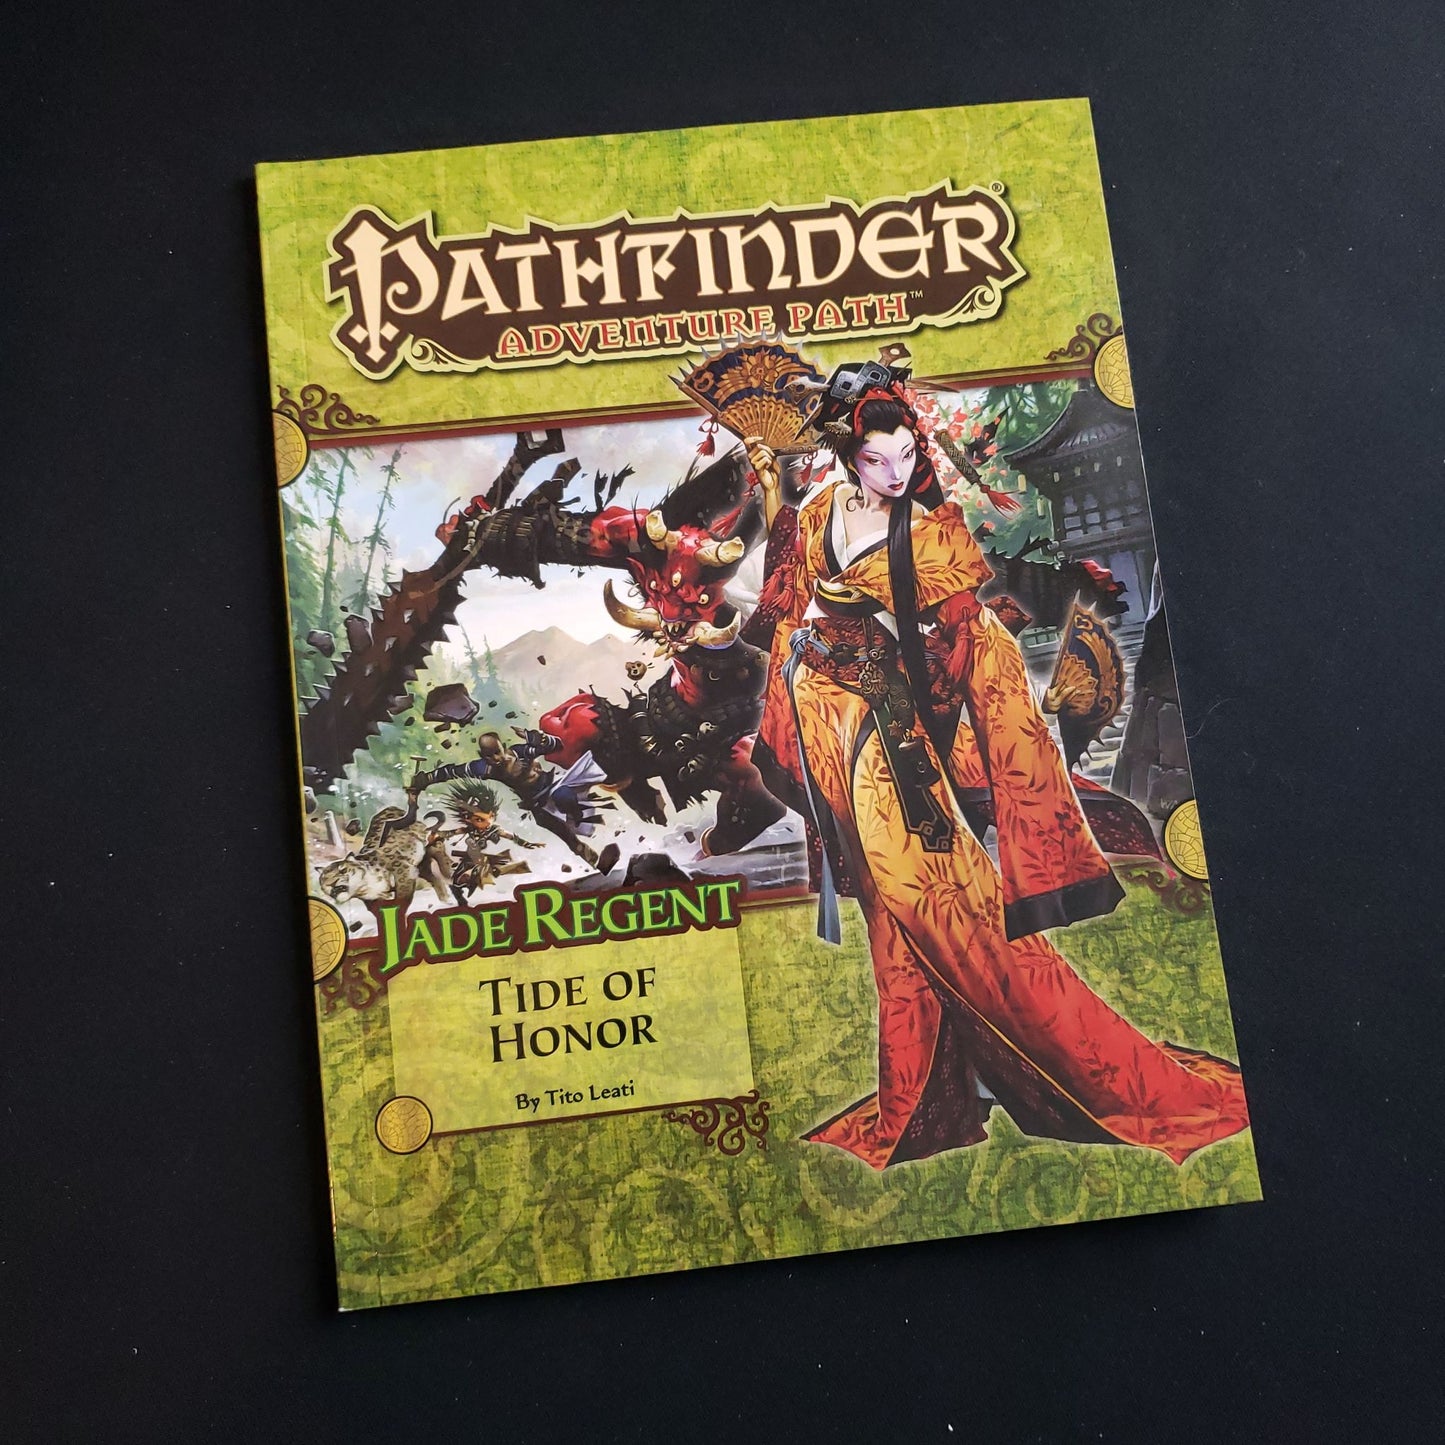 Image shows the front cover of the Tide of Honor book for the Pathfinder First Edition roleplaying game